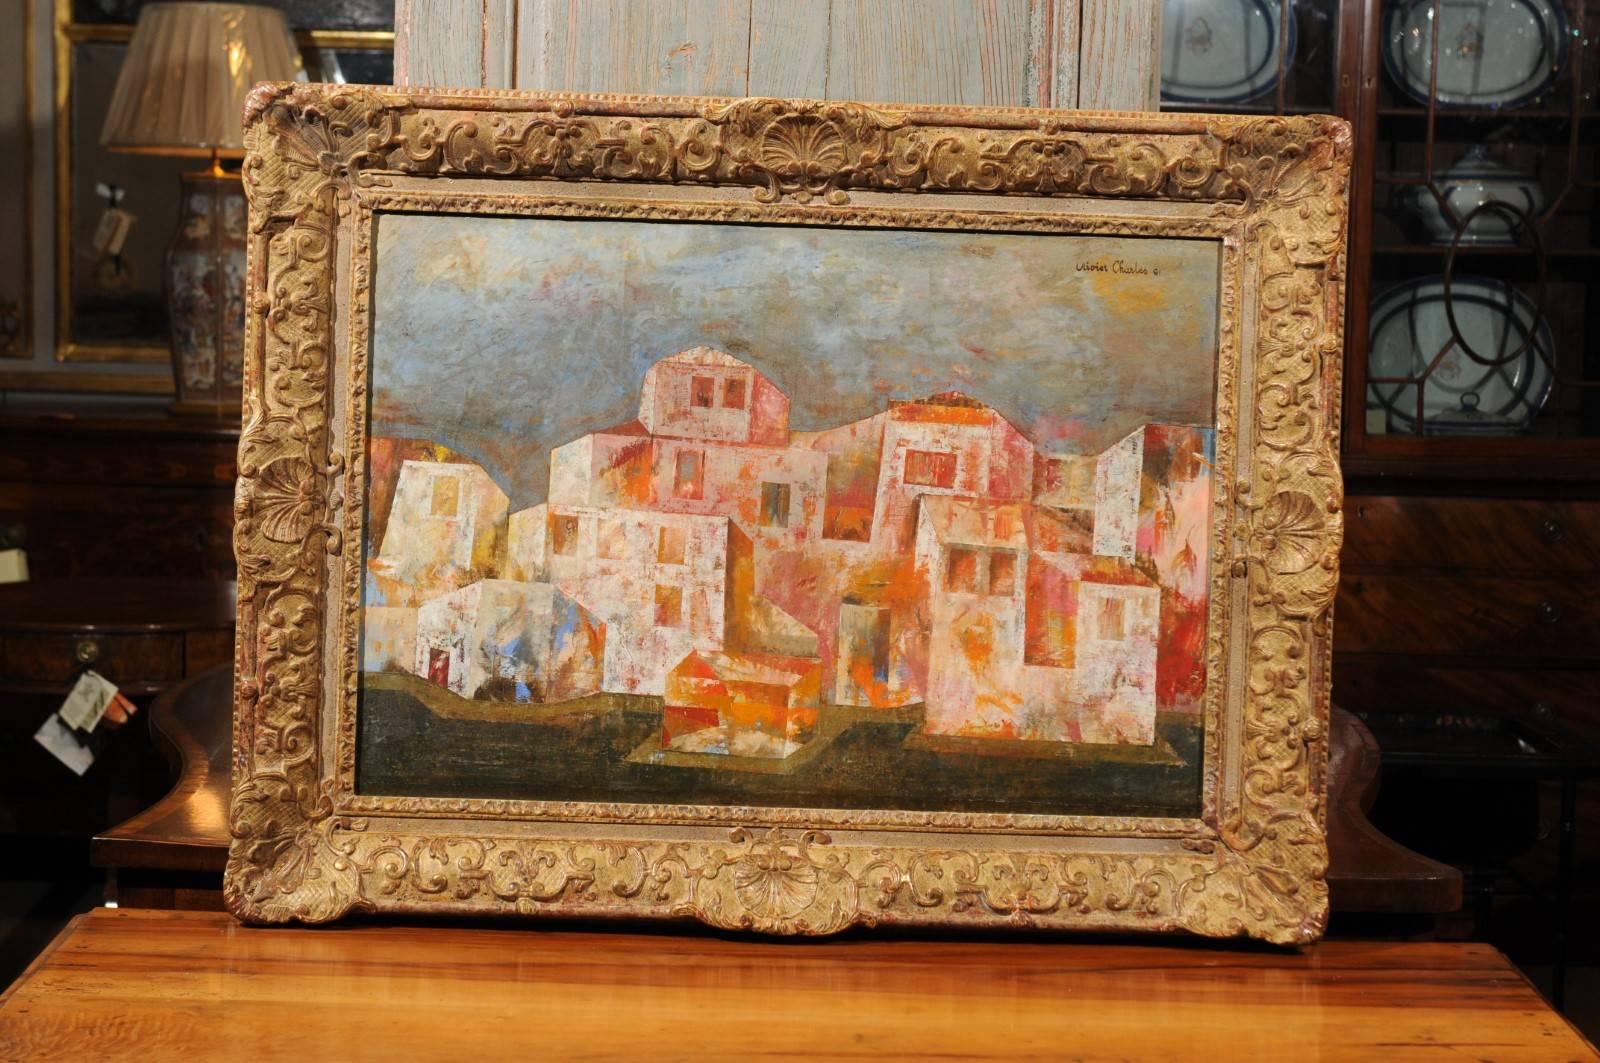 The Cubist style oil on canvas painting with architectural scene in orange, white and blue hues. The giltwood frame is from the 19th century. 

  